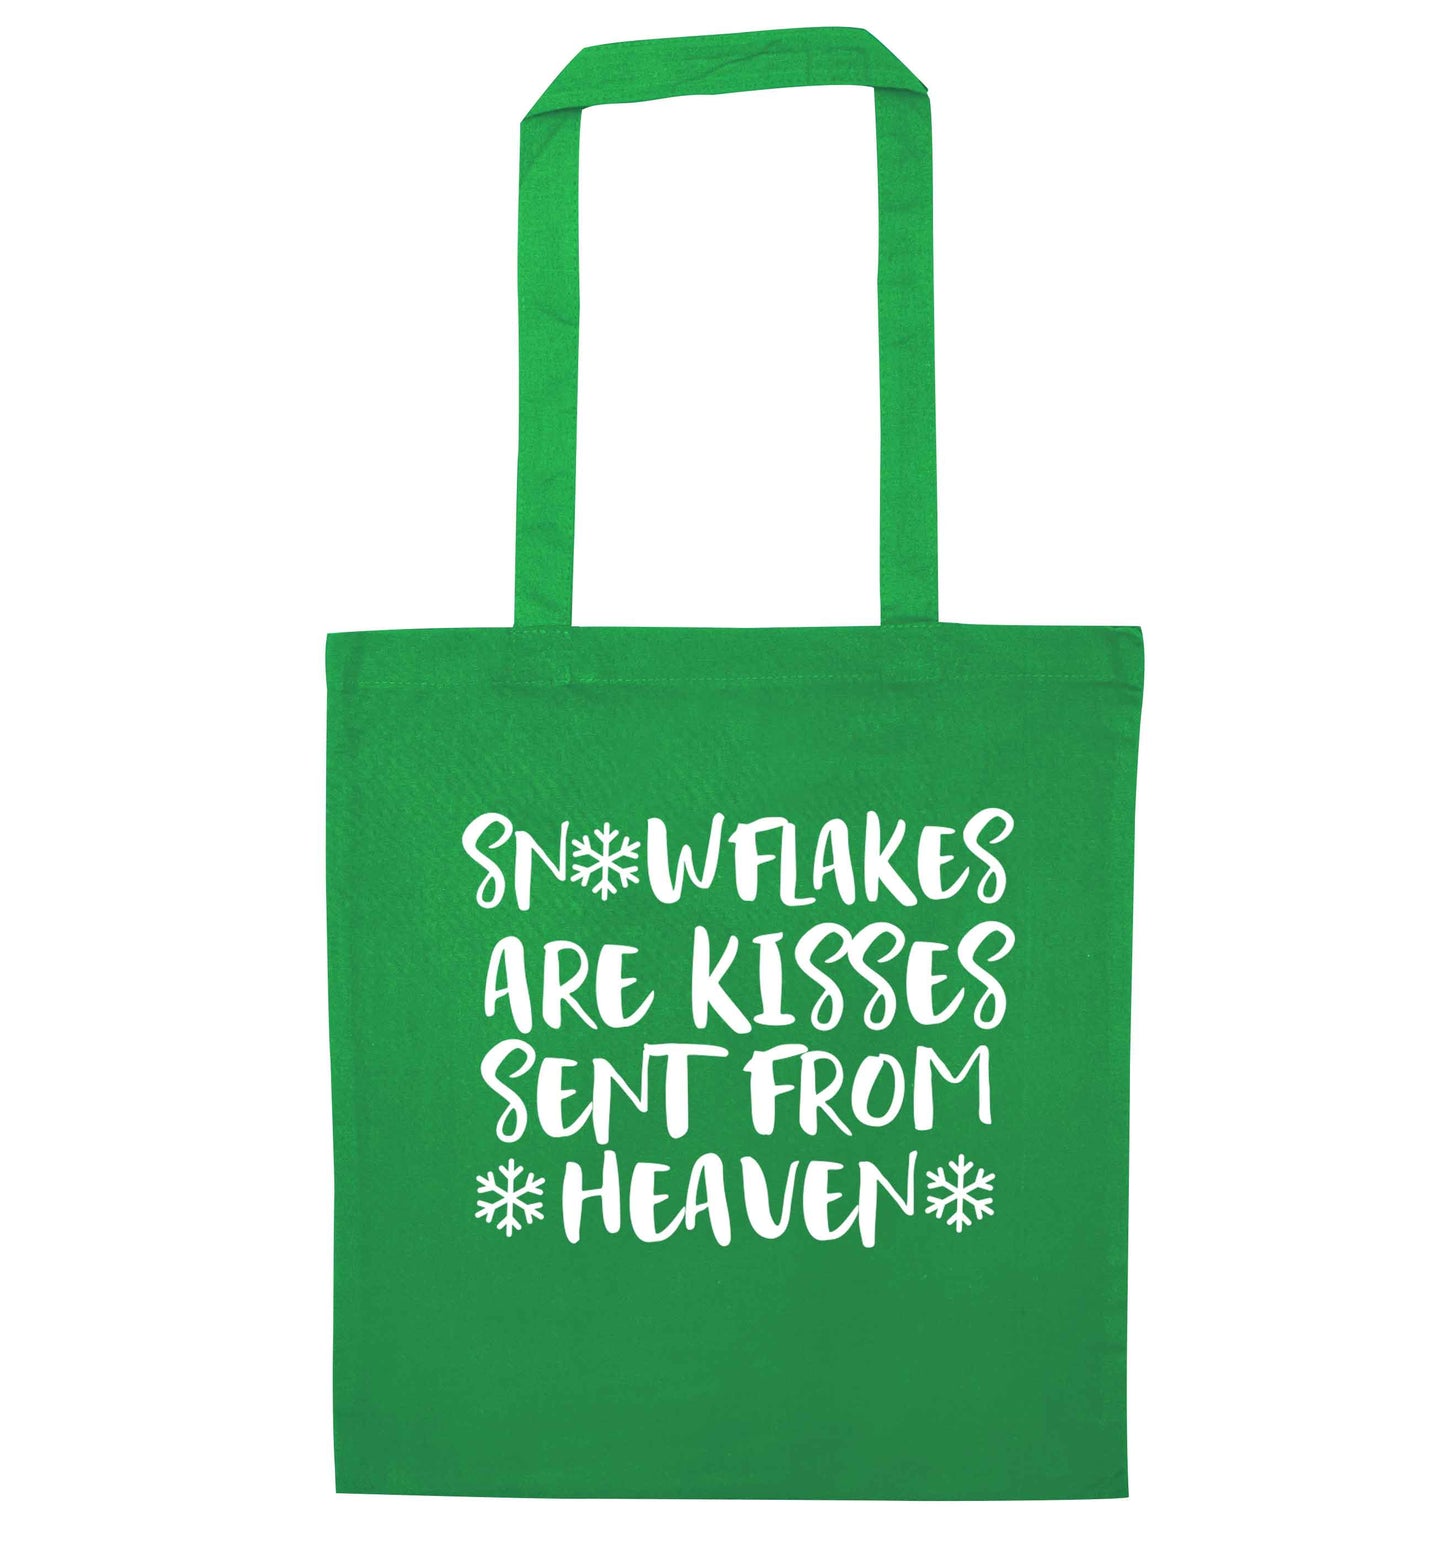 Snowflakes are kisses sent from heaven green tote bag